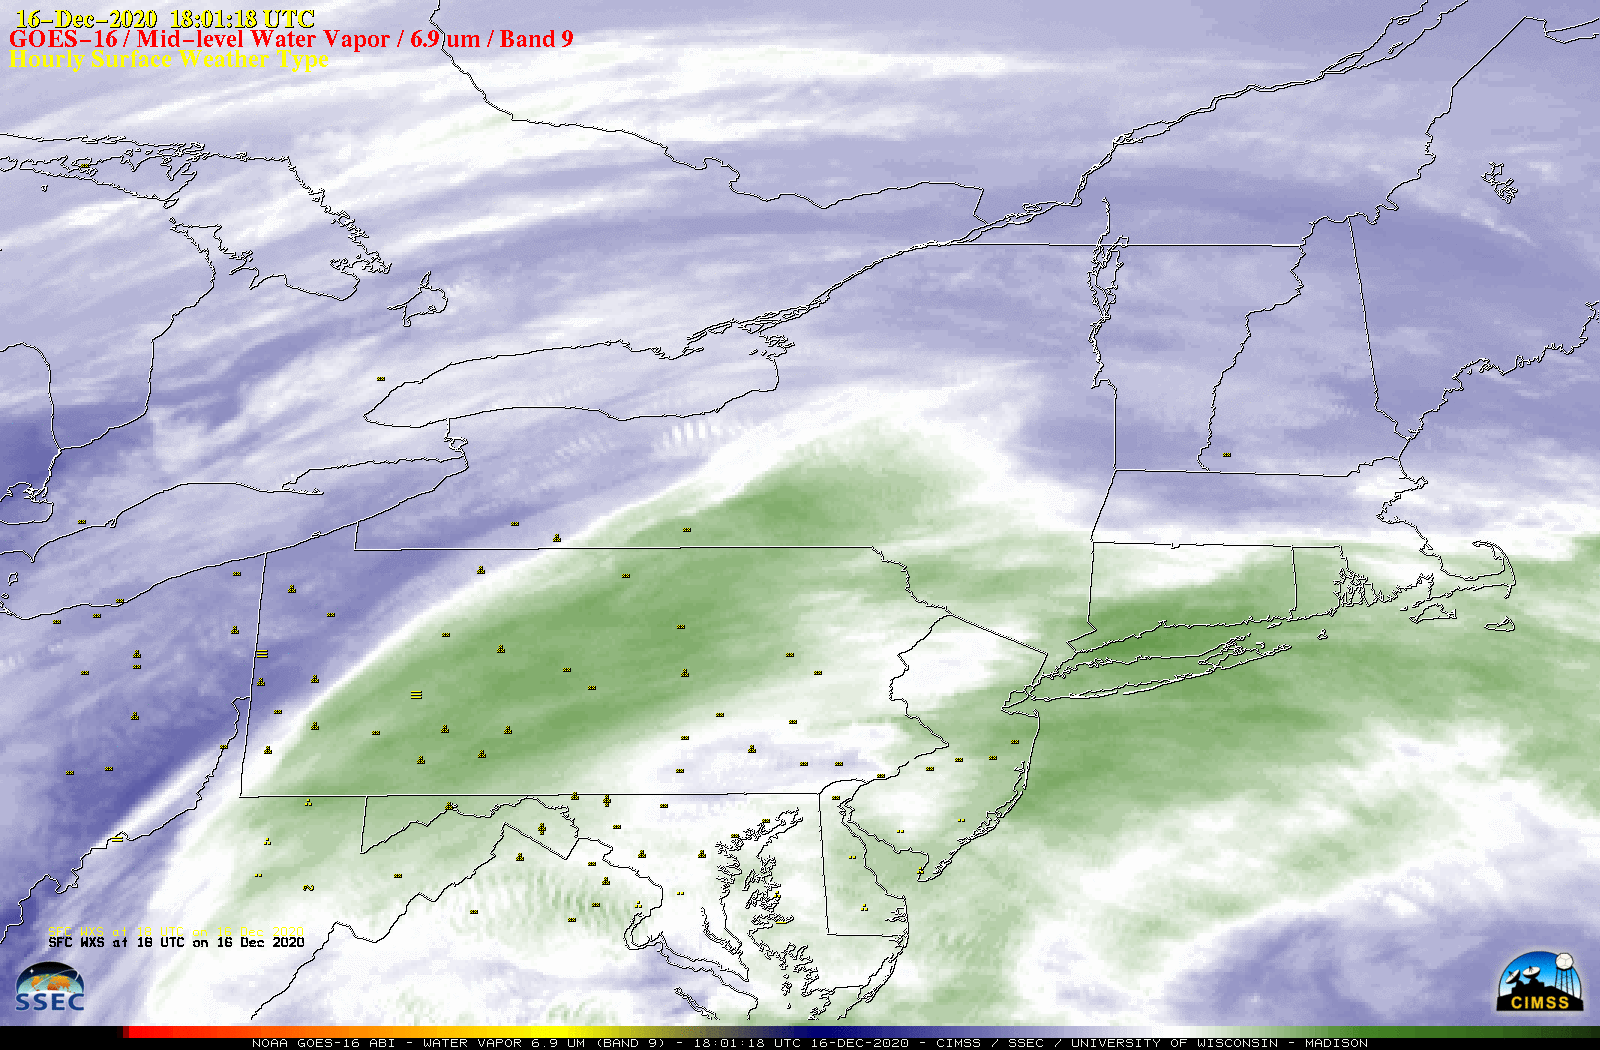 GOES-16 Mid-level (6.9 µm) Water Vapor images, with hourly plots of precipitation type [click to play animation | MP4]